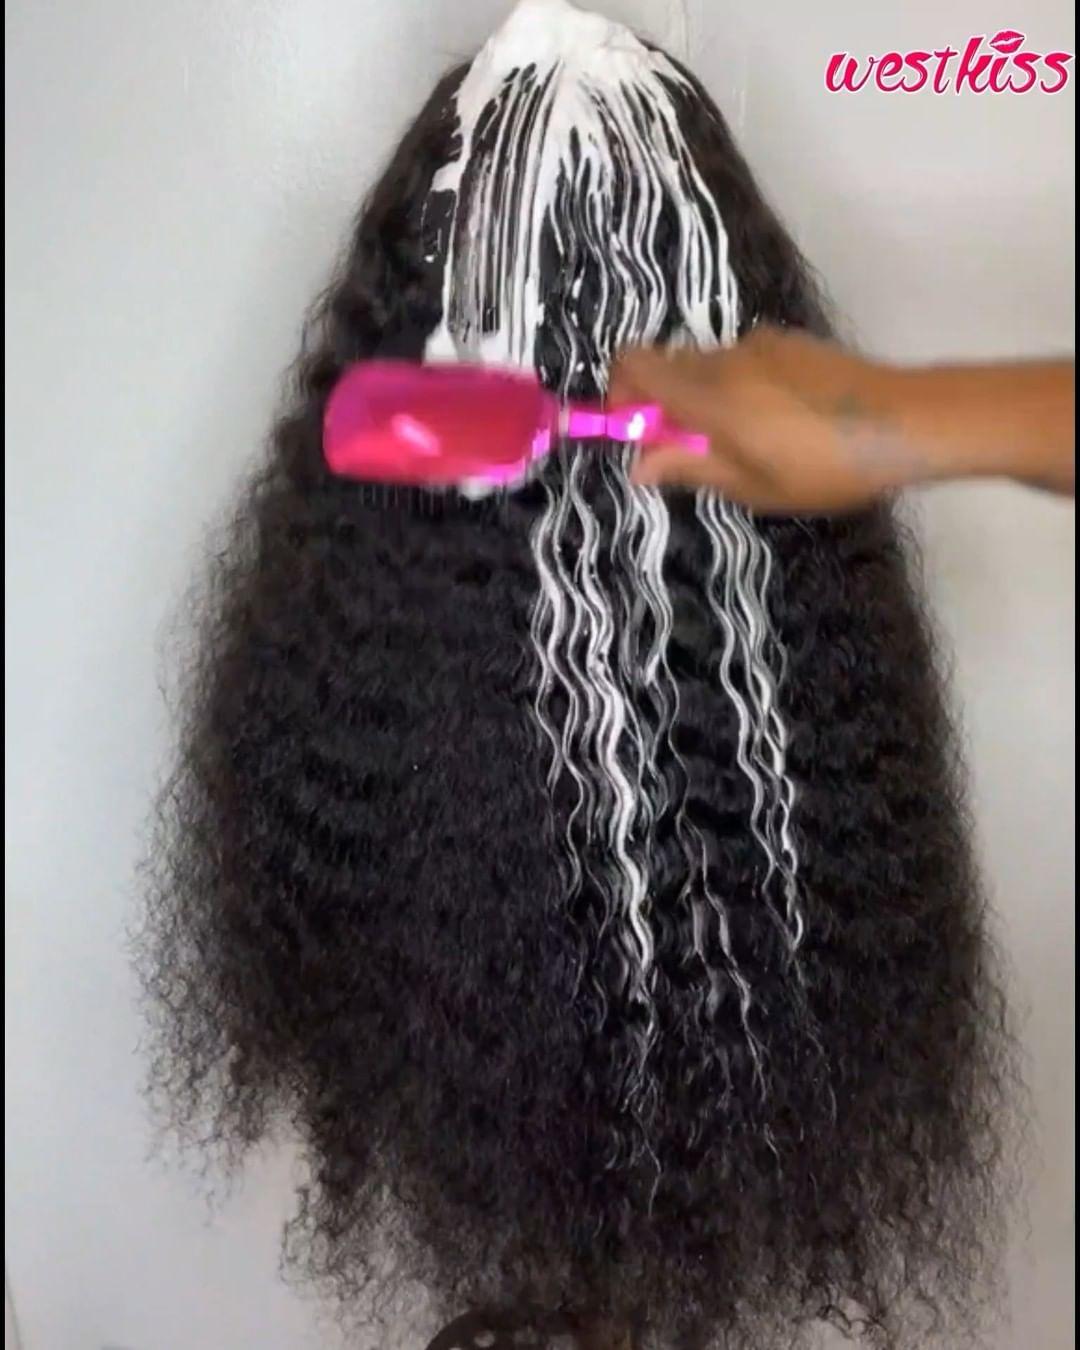 class="content__text"
 All orders get FREE 1 wig🎉🎉
Do you like Use Mousse😍
It’s so satisfying to Use Mousse to Wet A Full Curly🔥
How do you like that💋
Click my bio or dm for the link
.
.
.
 #westkisshair #curlyhair #bodywavewig #lacefrontwigs #transparentlace #curlywig #lacewig #lacefrontwig #frontalinstall #customwigs #closure #straightwig #wigunit
 #gluelesswig #blackgirlmagic #hairstyles #customunit #wigsforsale #humanhairwig #wigfashion 
 